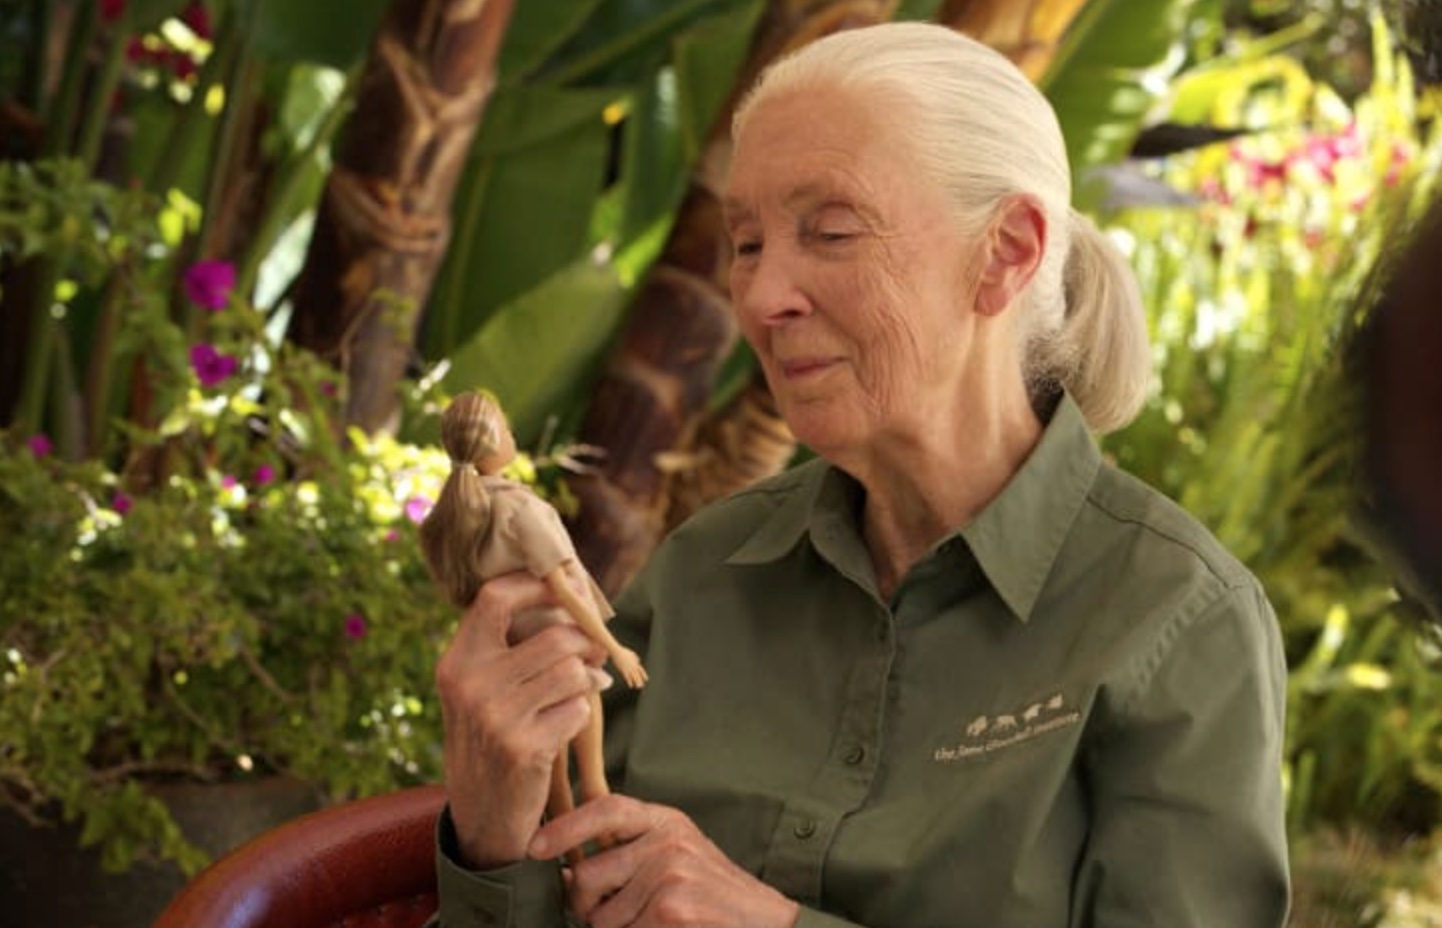 The iconic Barbie doll is getting ready for her next endeavor. The latest doll is inspired by primatologist Dr. Jane Goodall.